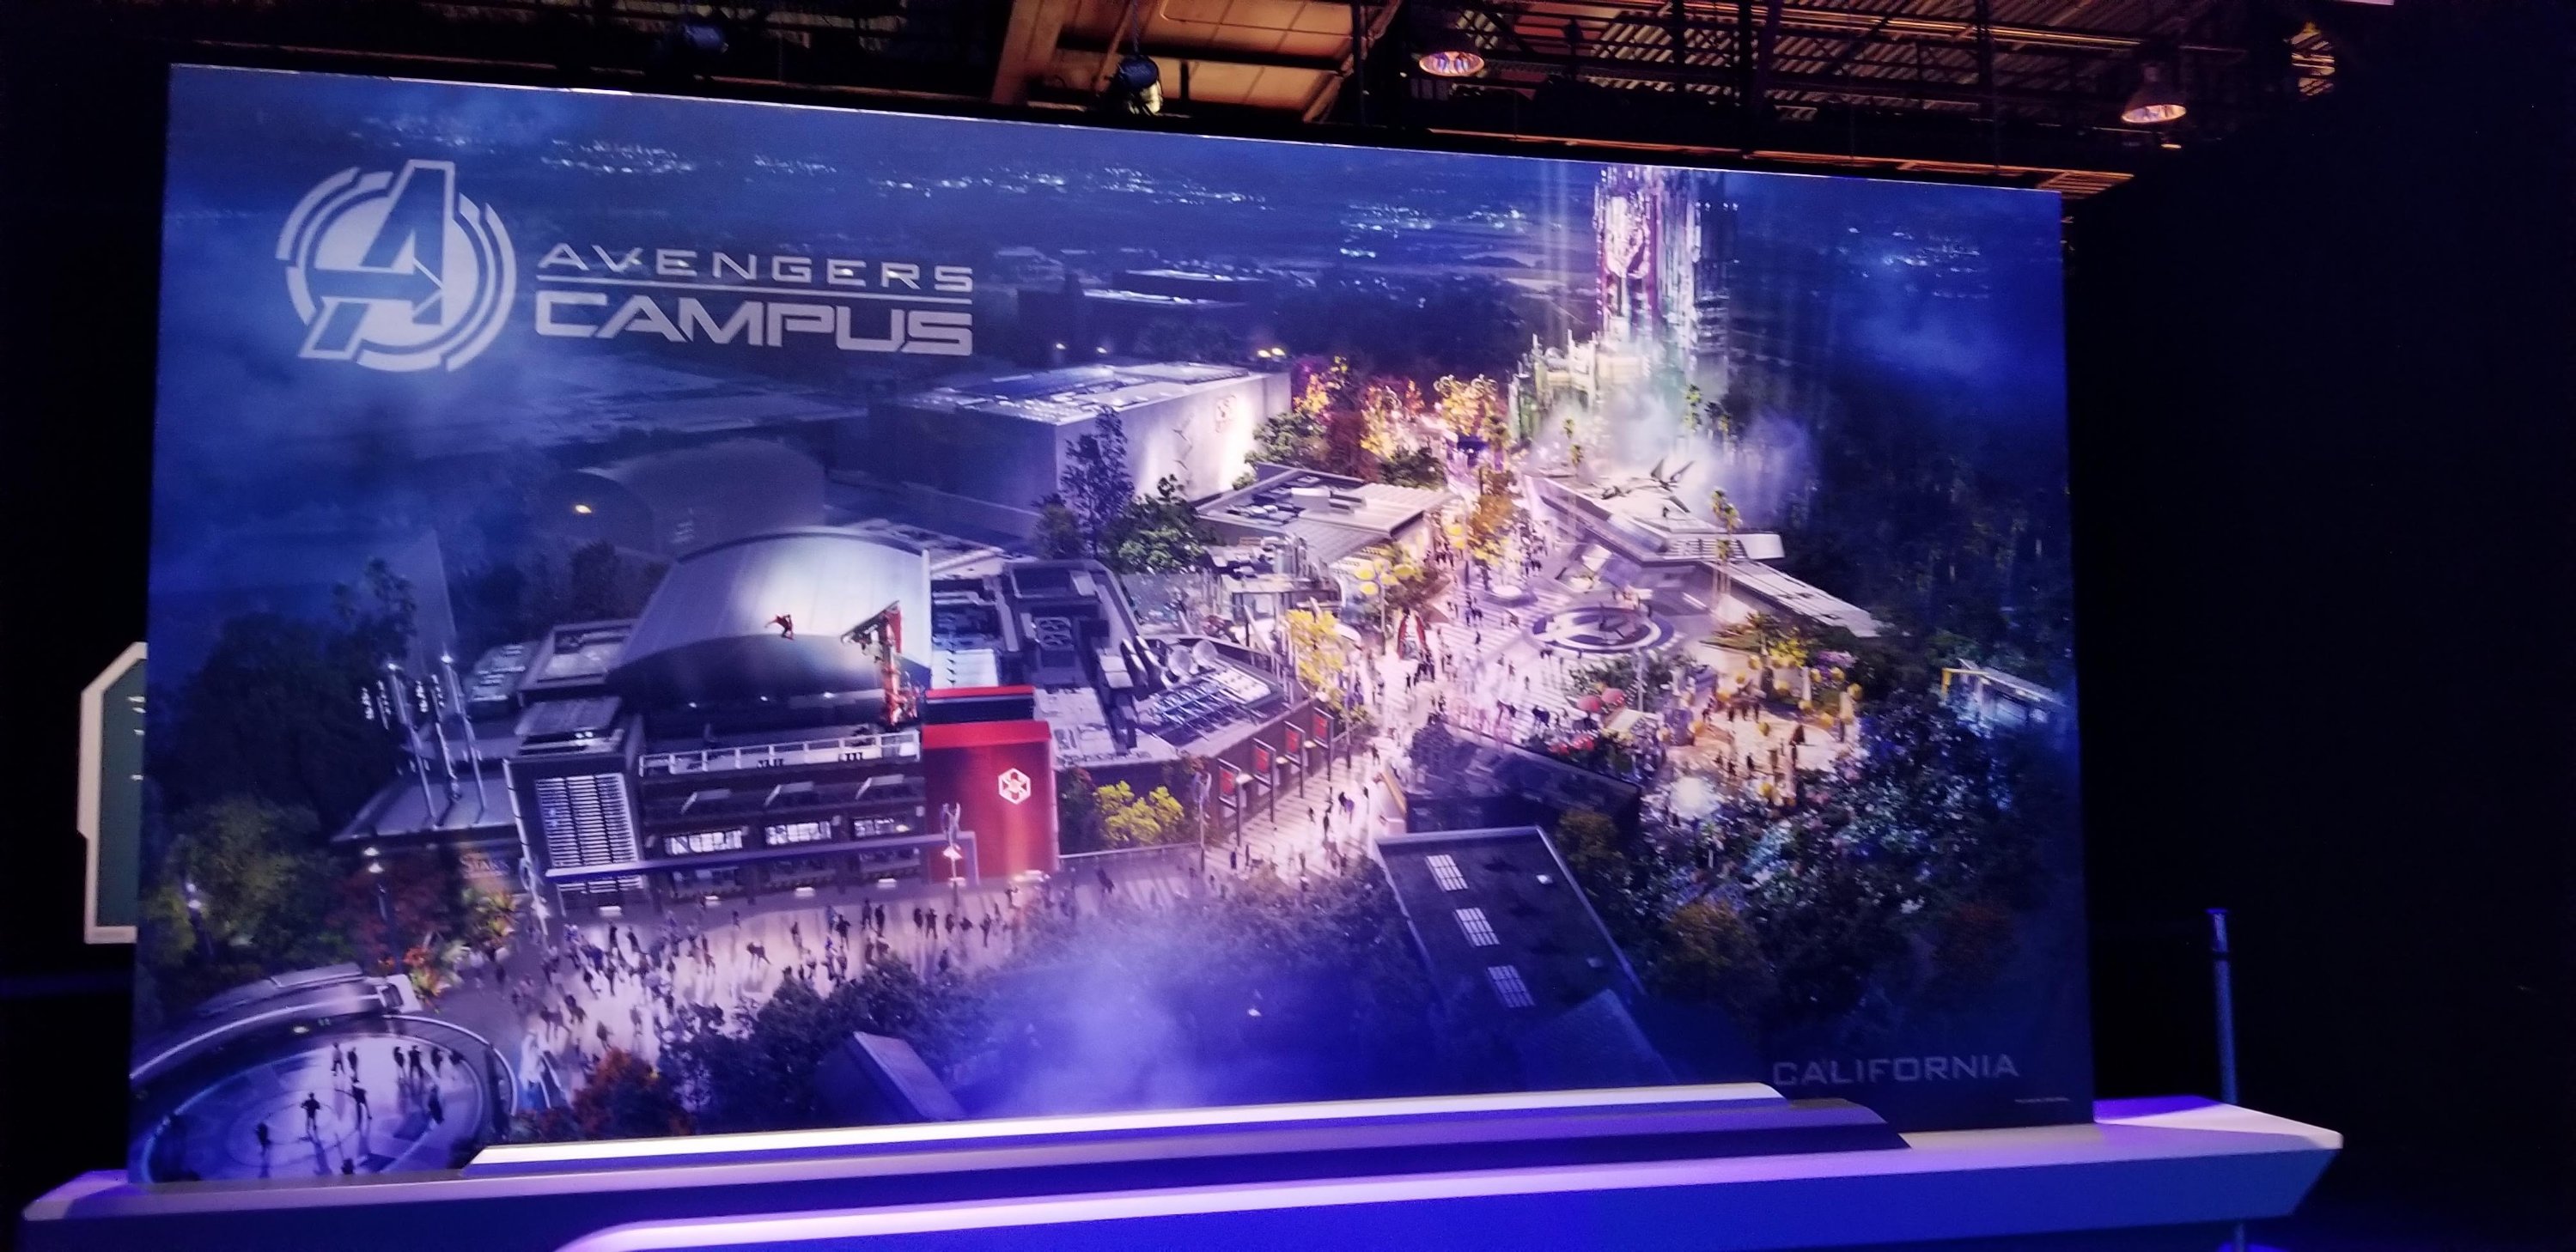 First look at the Avengers Campus Coming to Disney’s California Adventure and Disneyland Paris